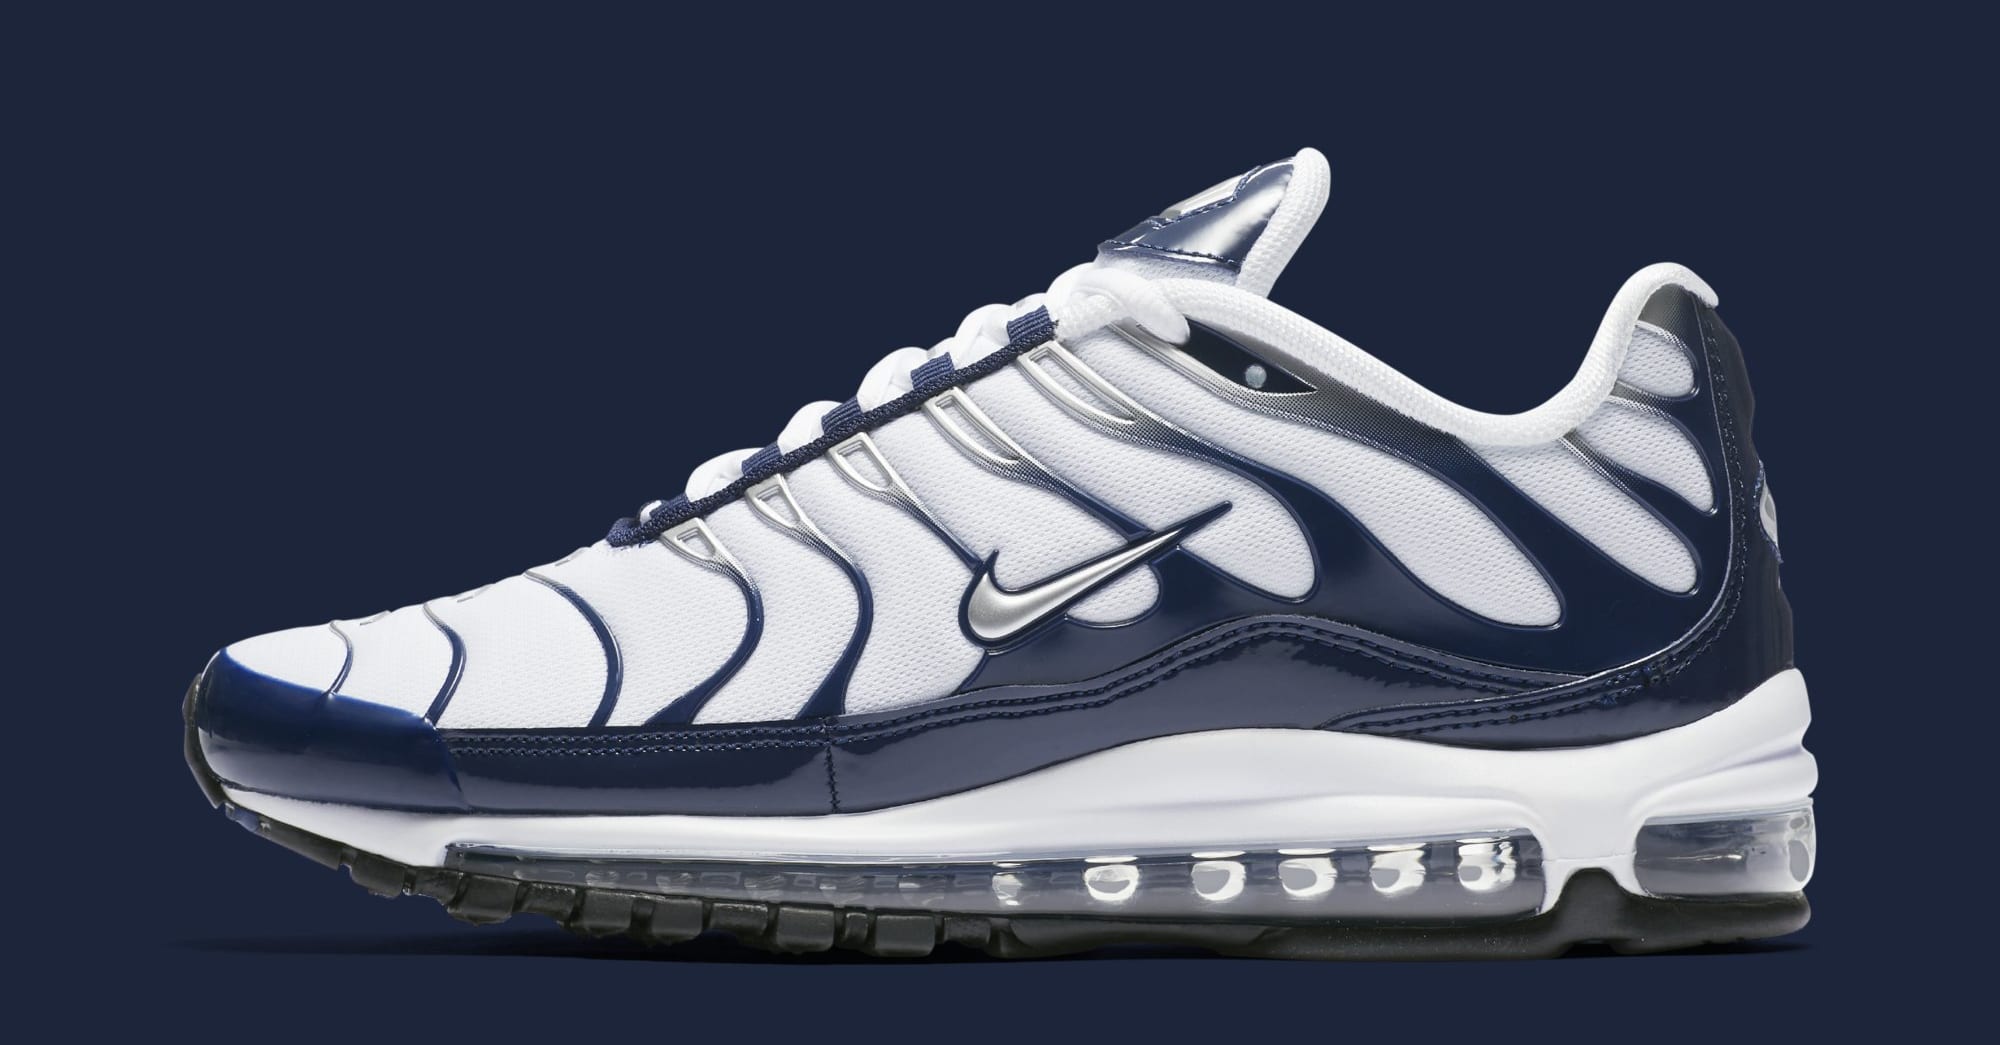 Another Familiar Color Comes to the Air Max 97 Plus Complex